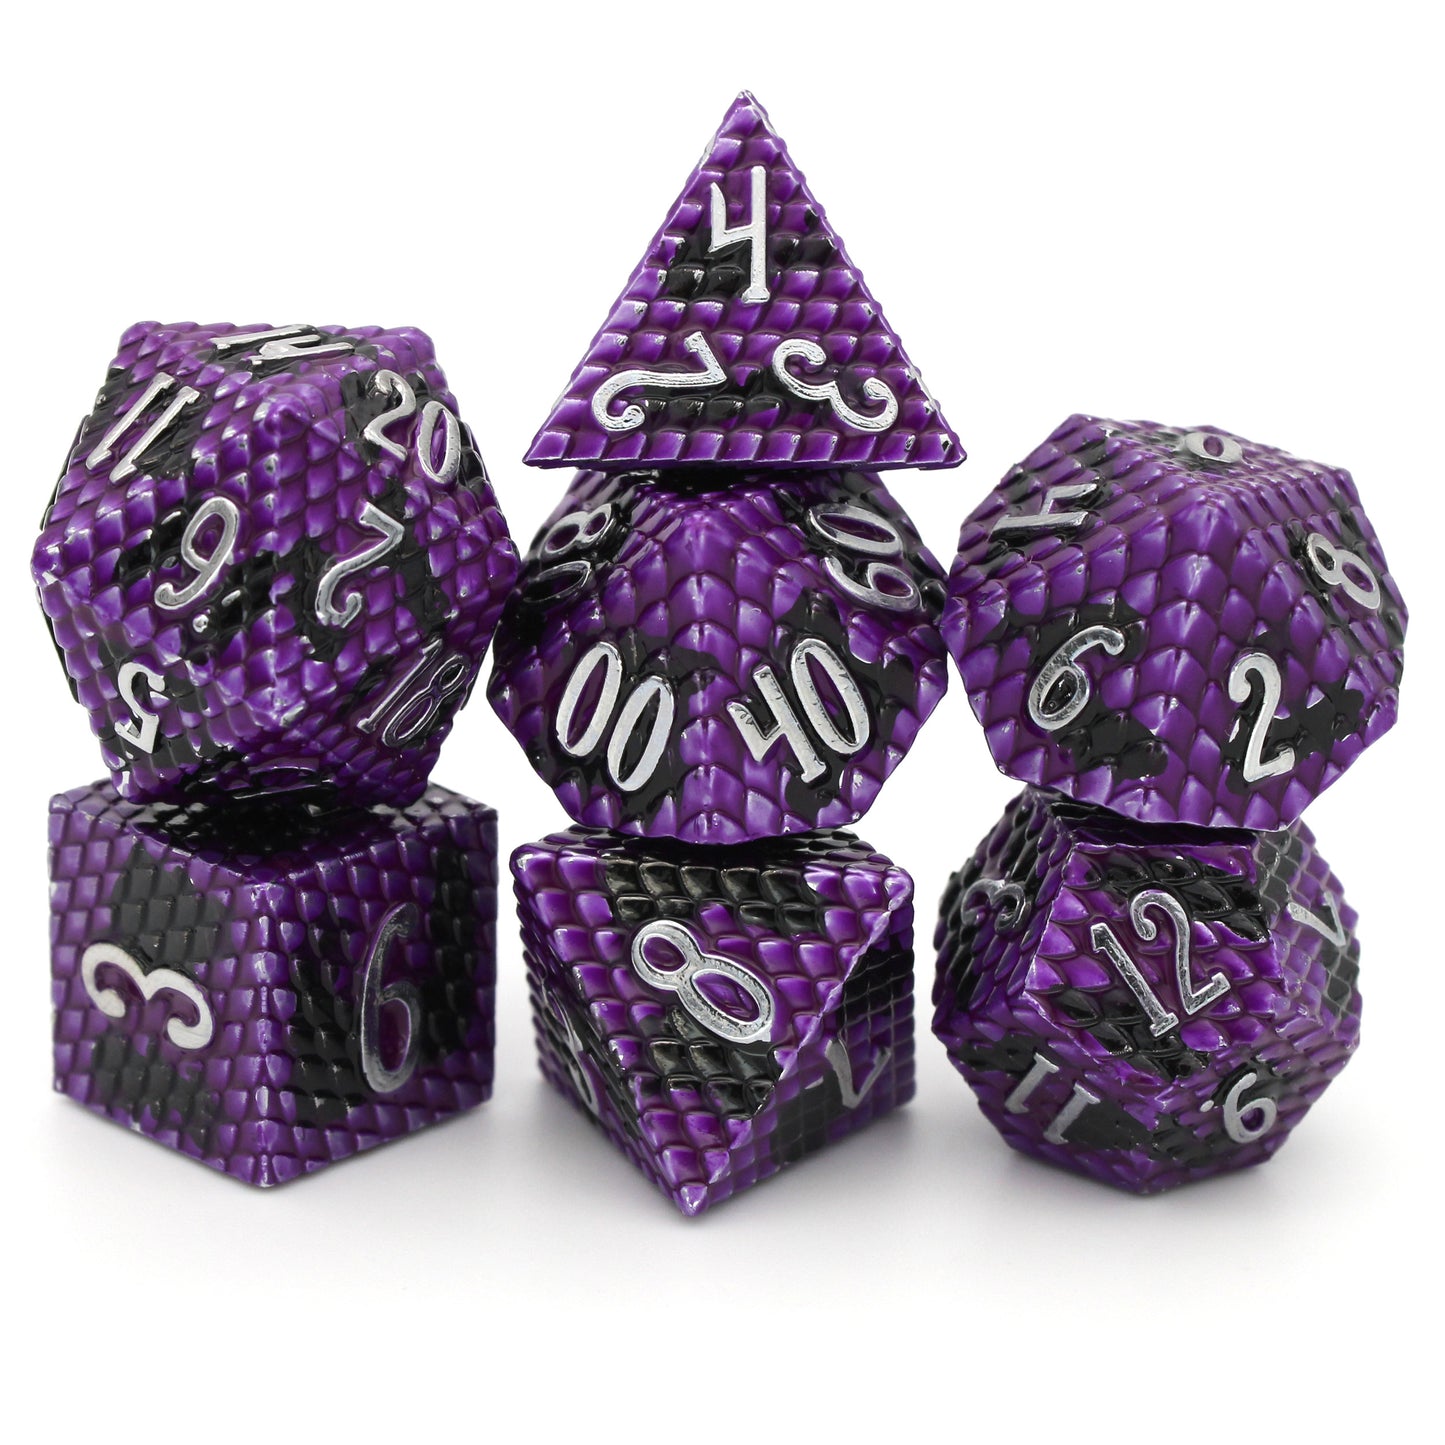 Deep Dragon is a 7-piece purple and black scaled metal set with cool silver numbering.